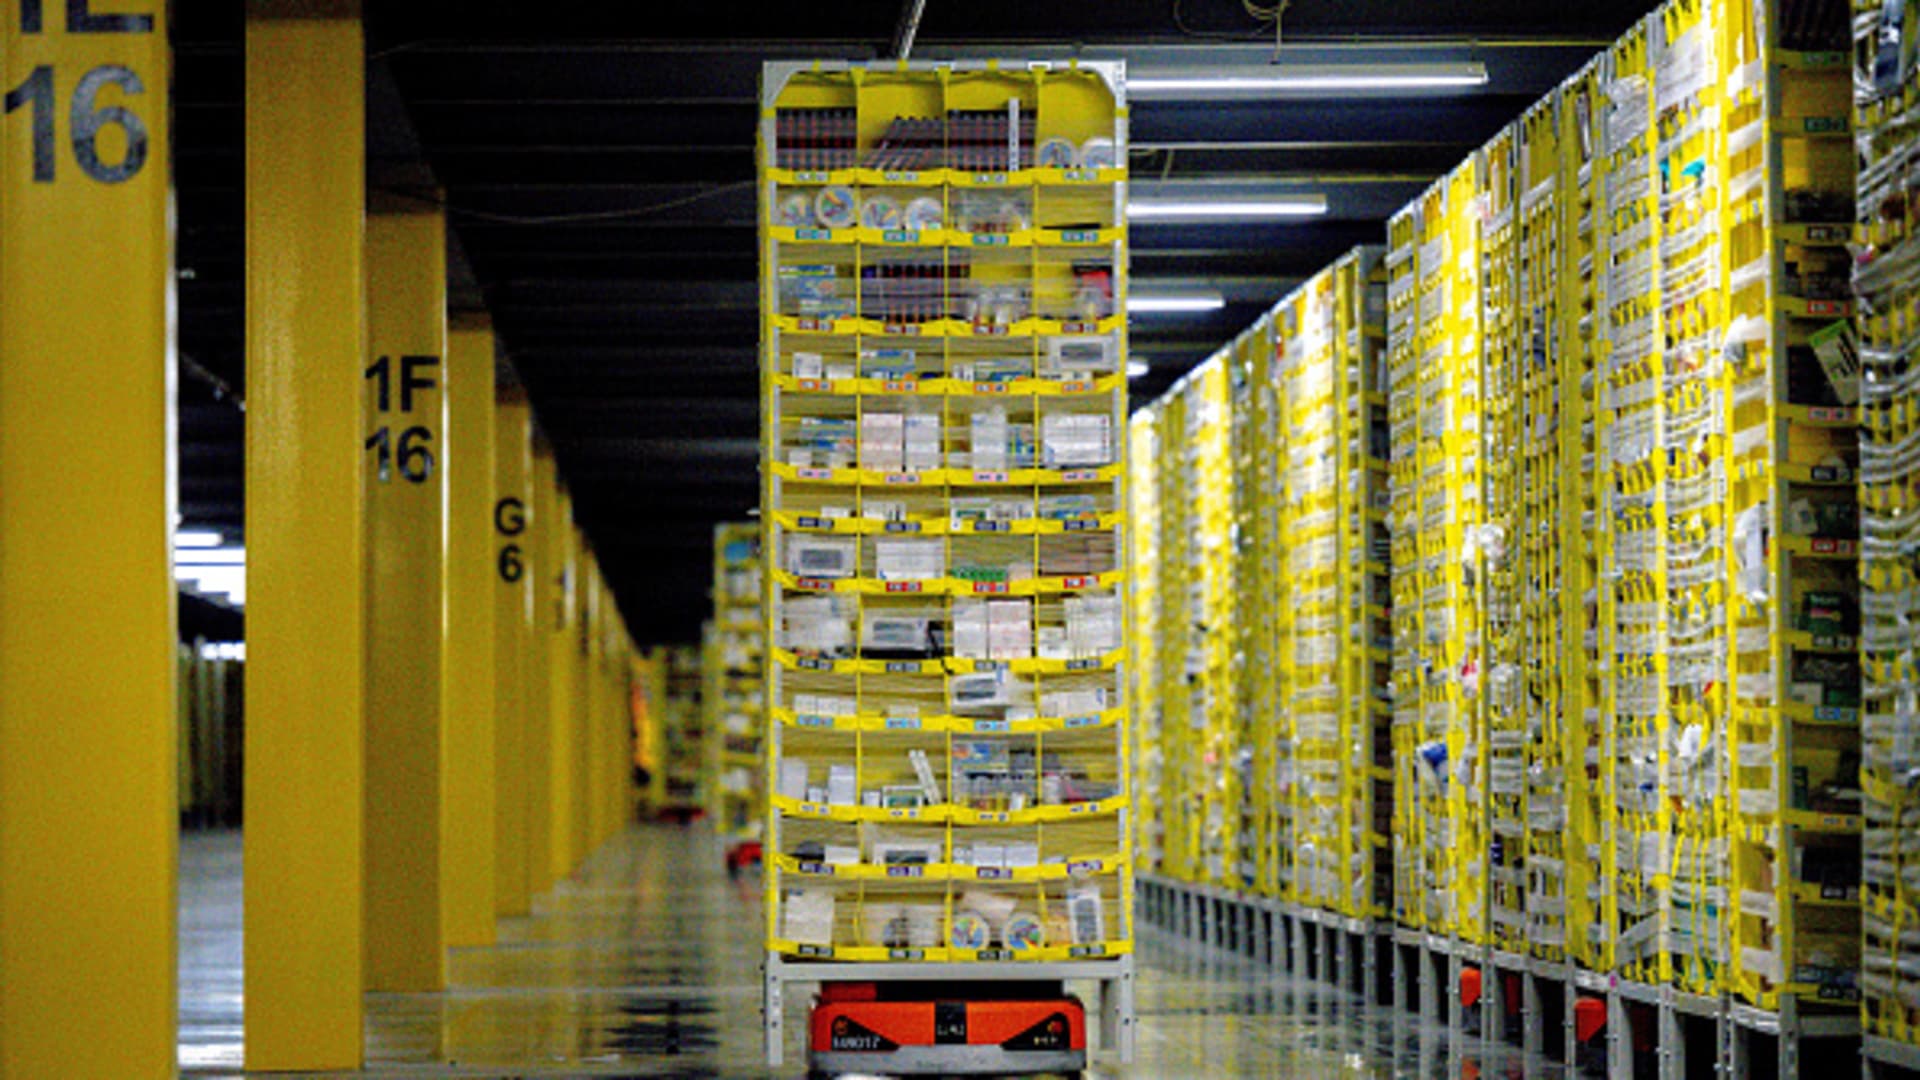 Robots transport goods to the employees in warehouse at Amazon fulfillment center in Eastvale on Tuesday, Aug. 31, 2021.